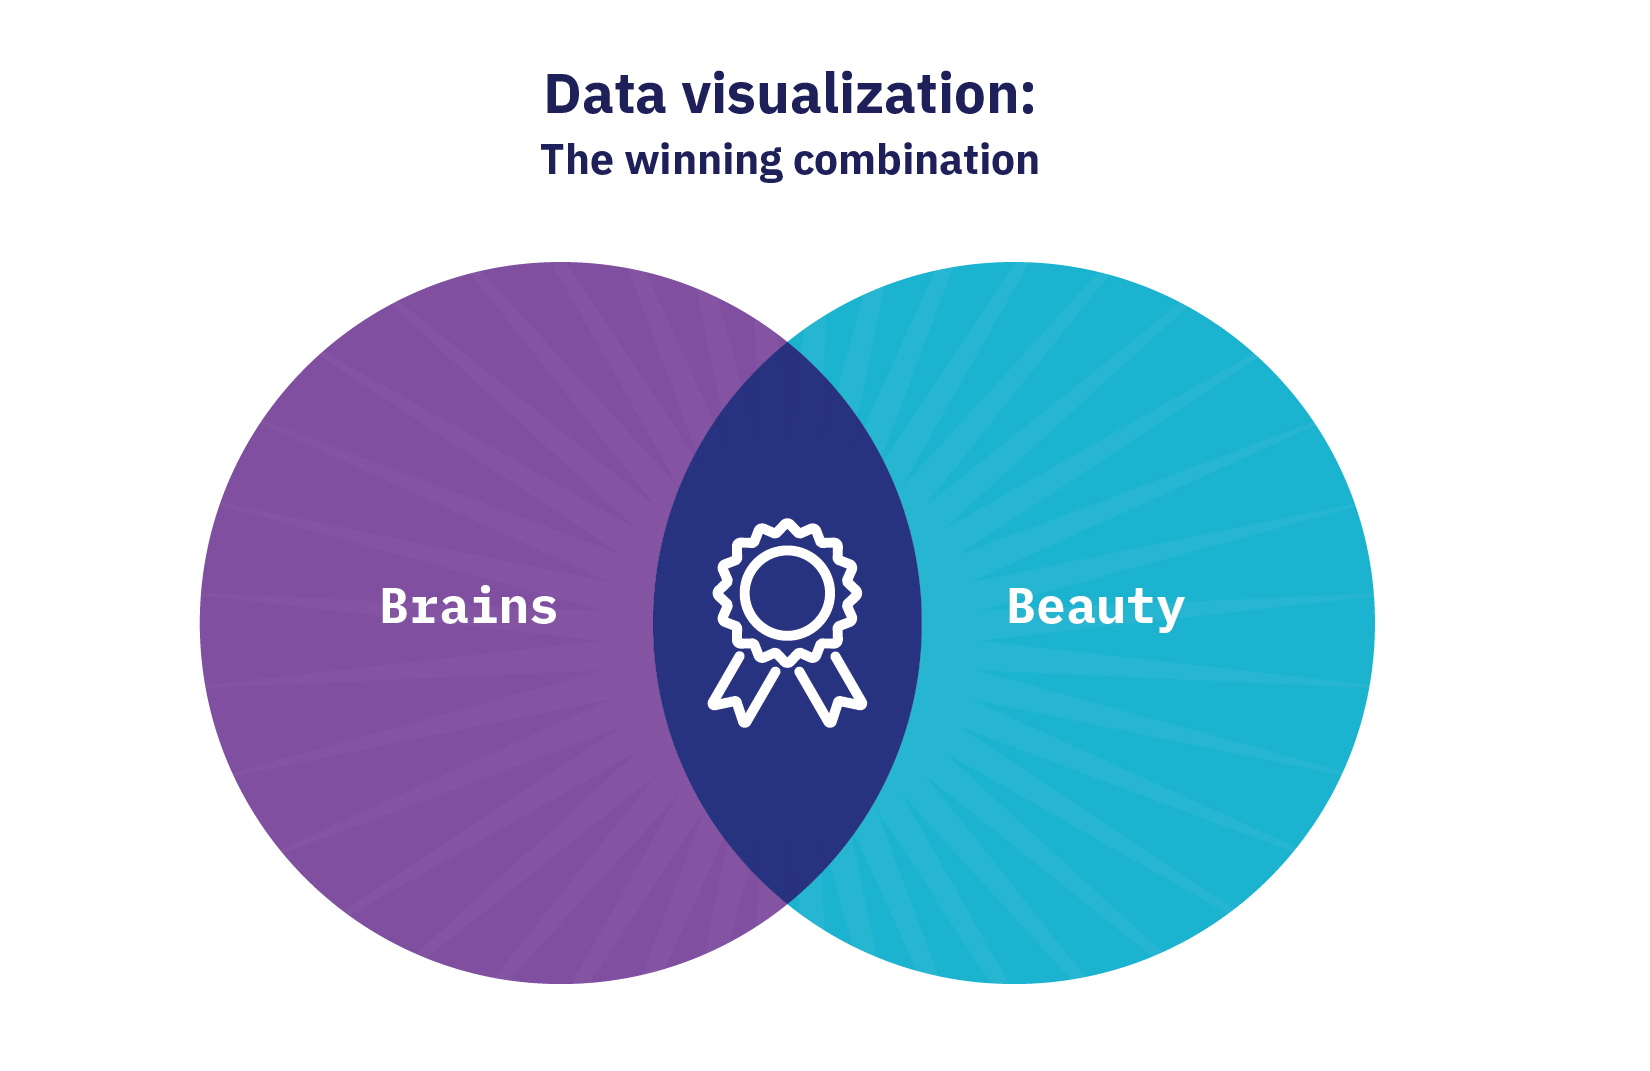 Venn diagram showing the winning combination for data visualizations is a mixture of brains and beauty